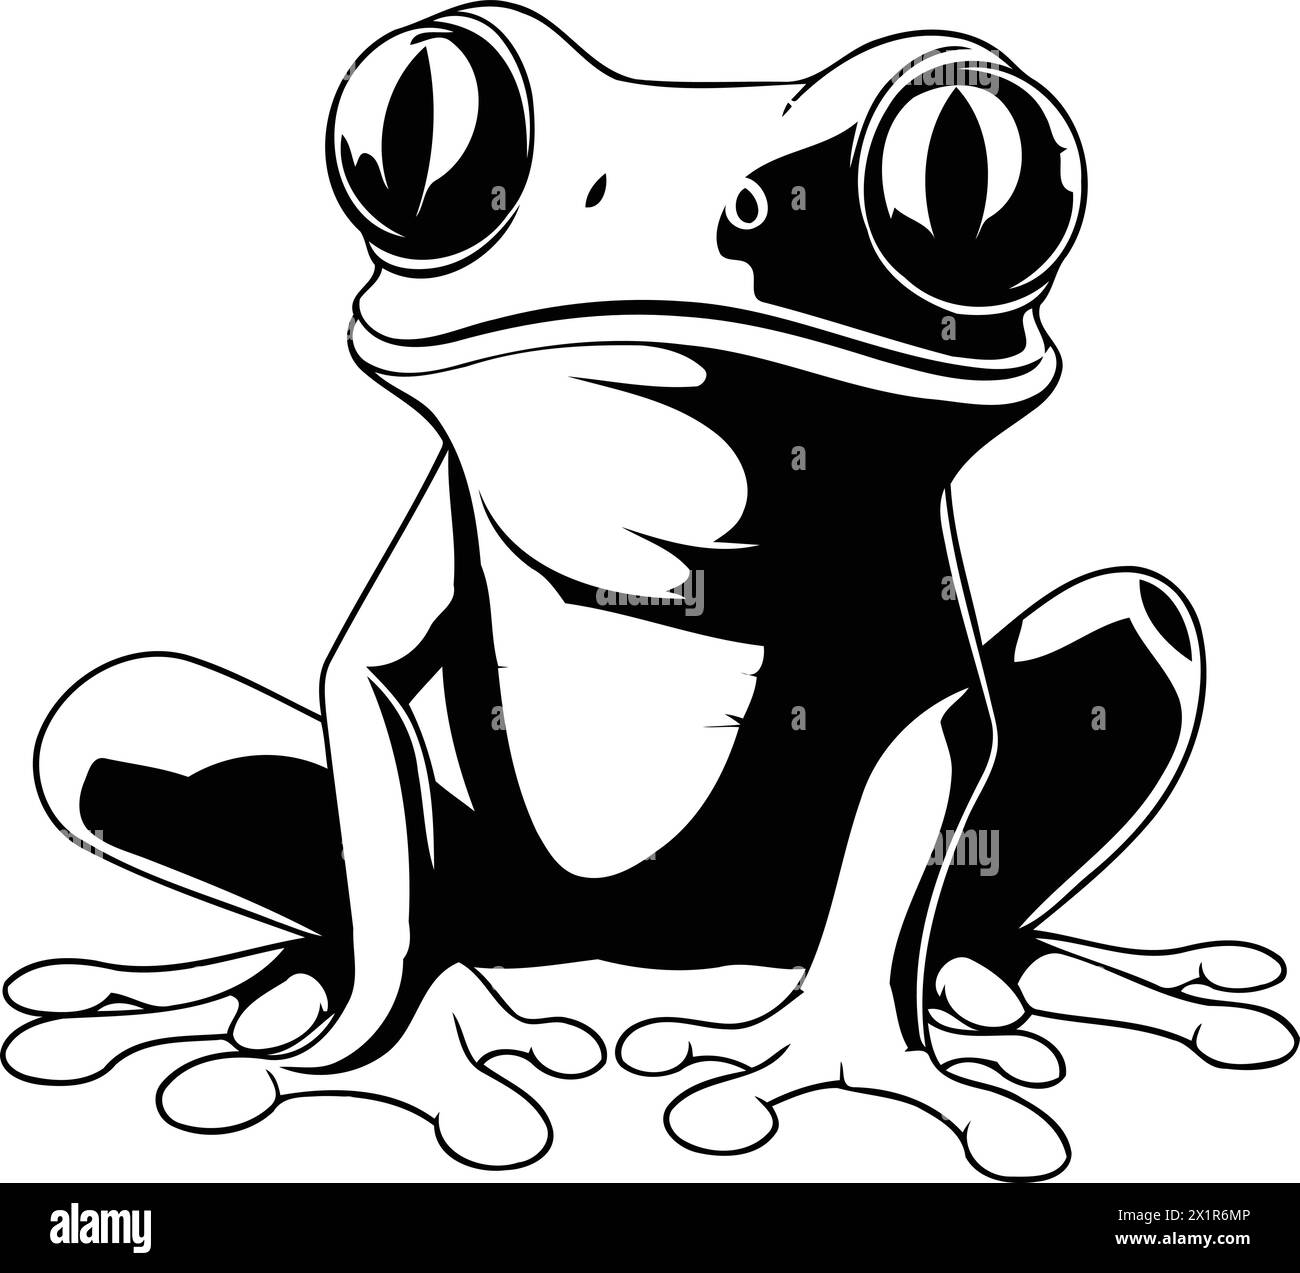 Frog cartoon character. Vector illustration isolated on a white background. Stock Vector